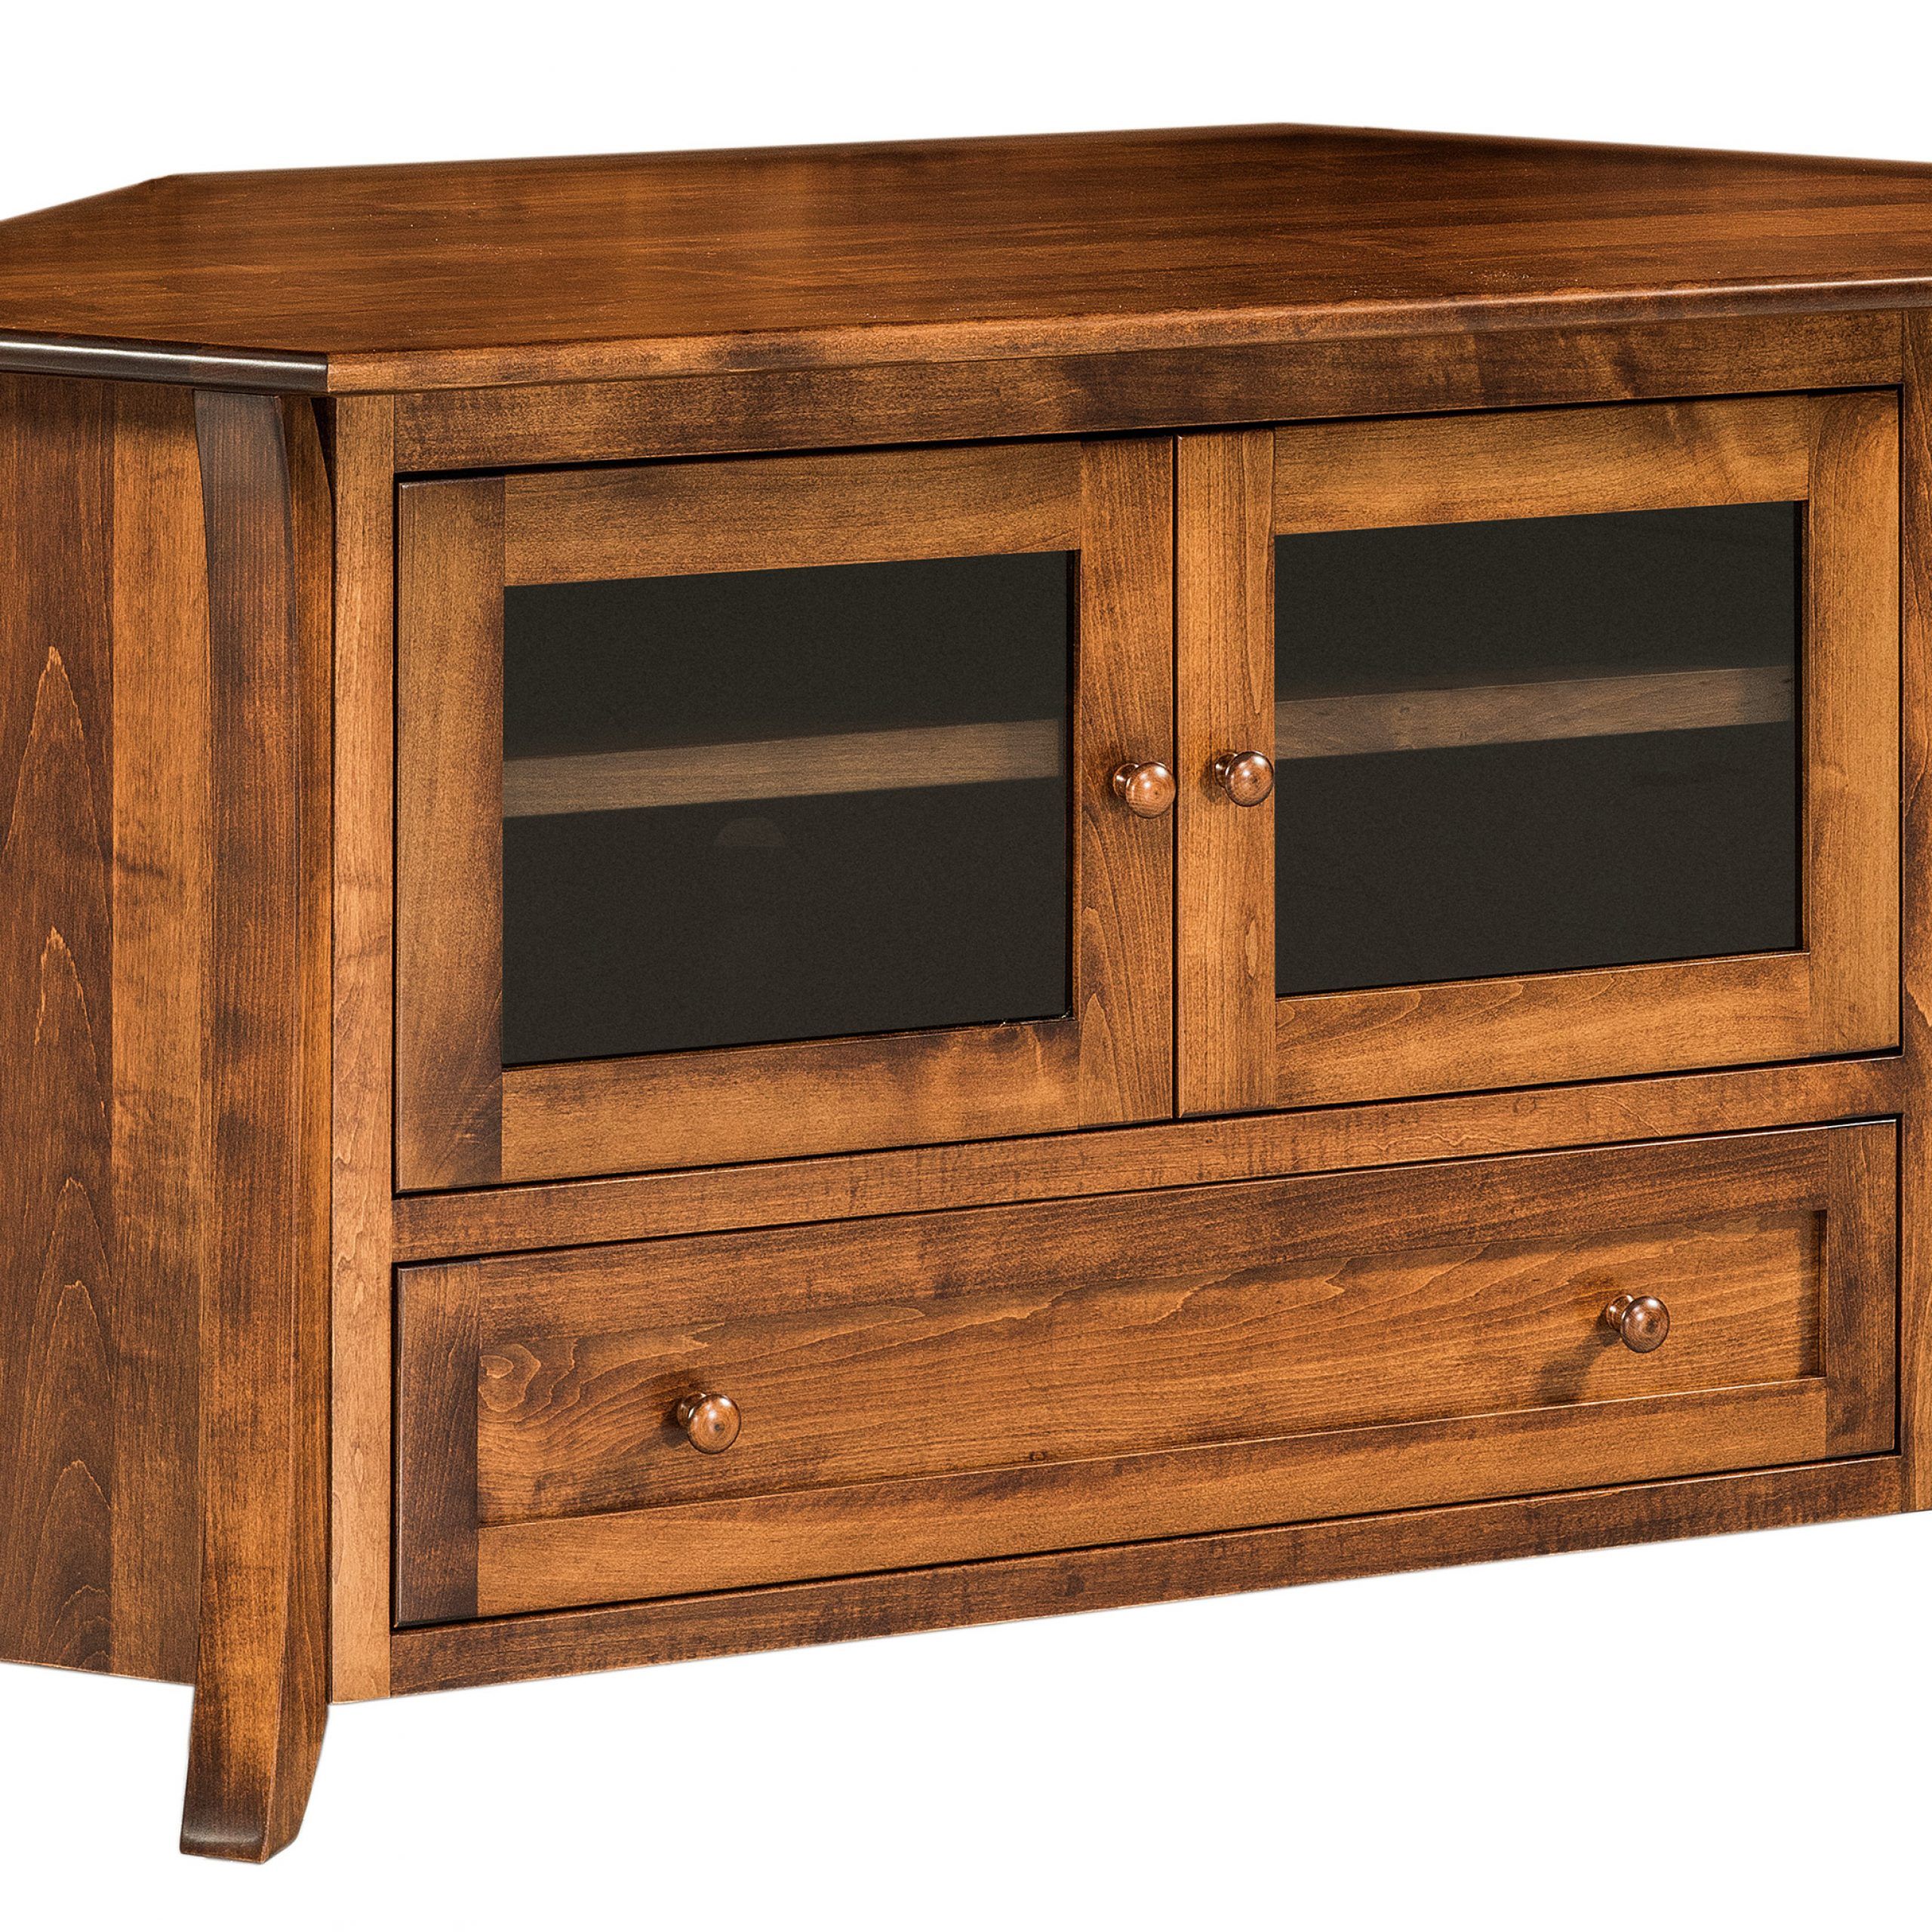 Calendonia Flat Screen Tv Corner Cabinet | Hardwood Creations Within Corner Tv Cabinets For Flat Screen (View 8 of 15)